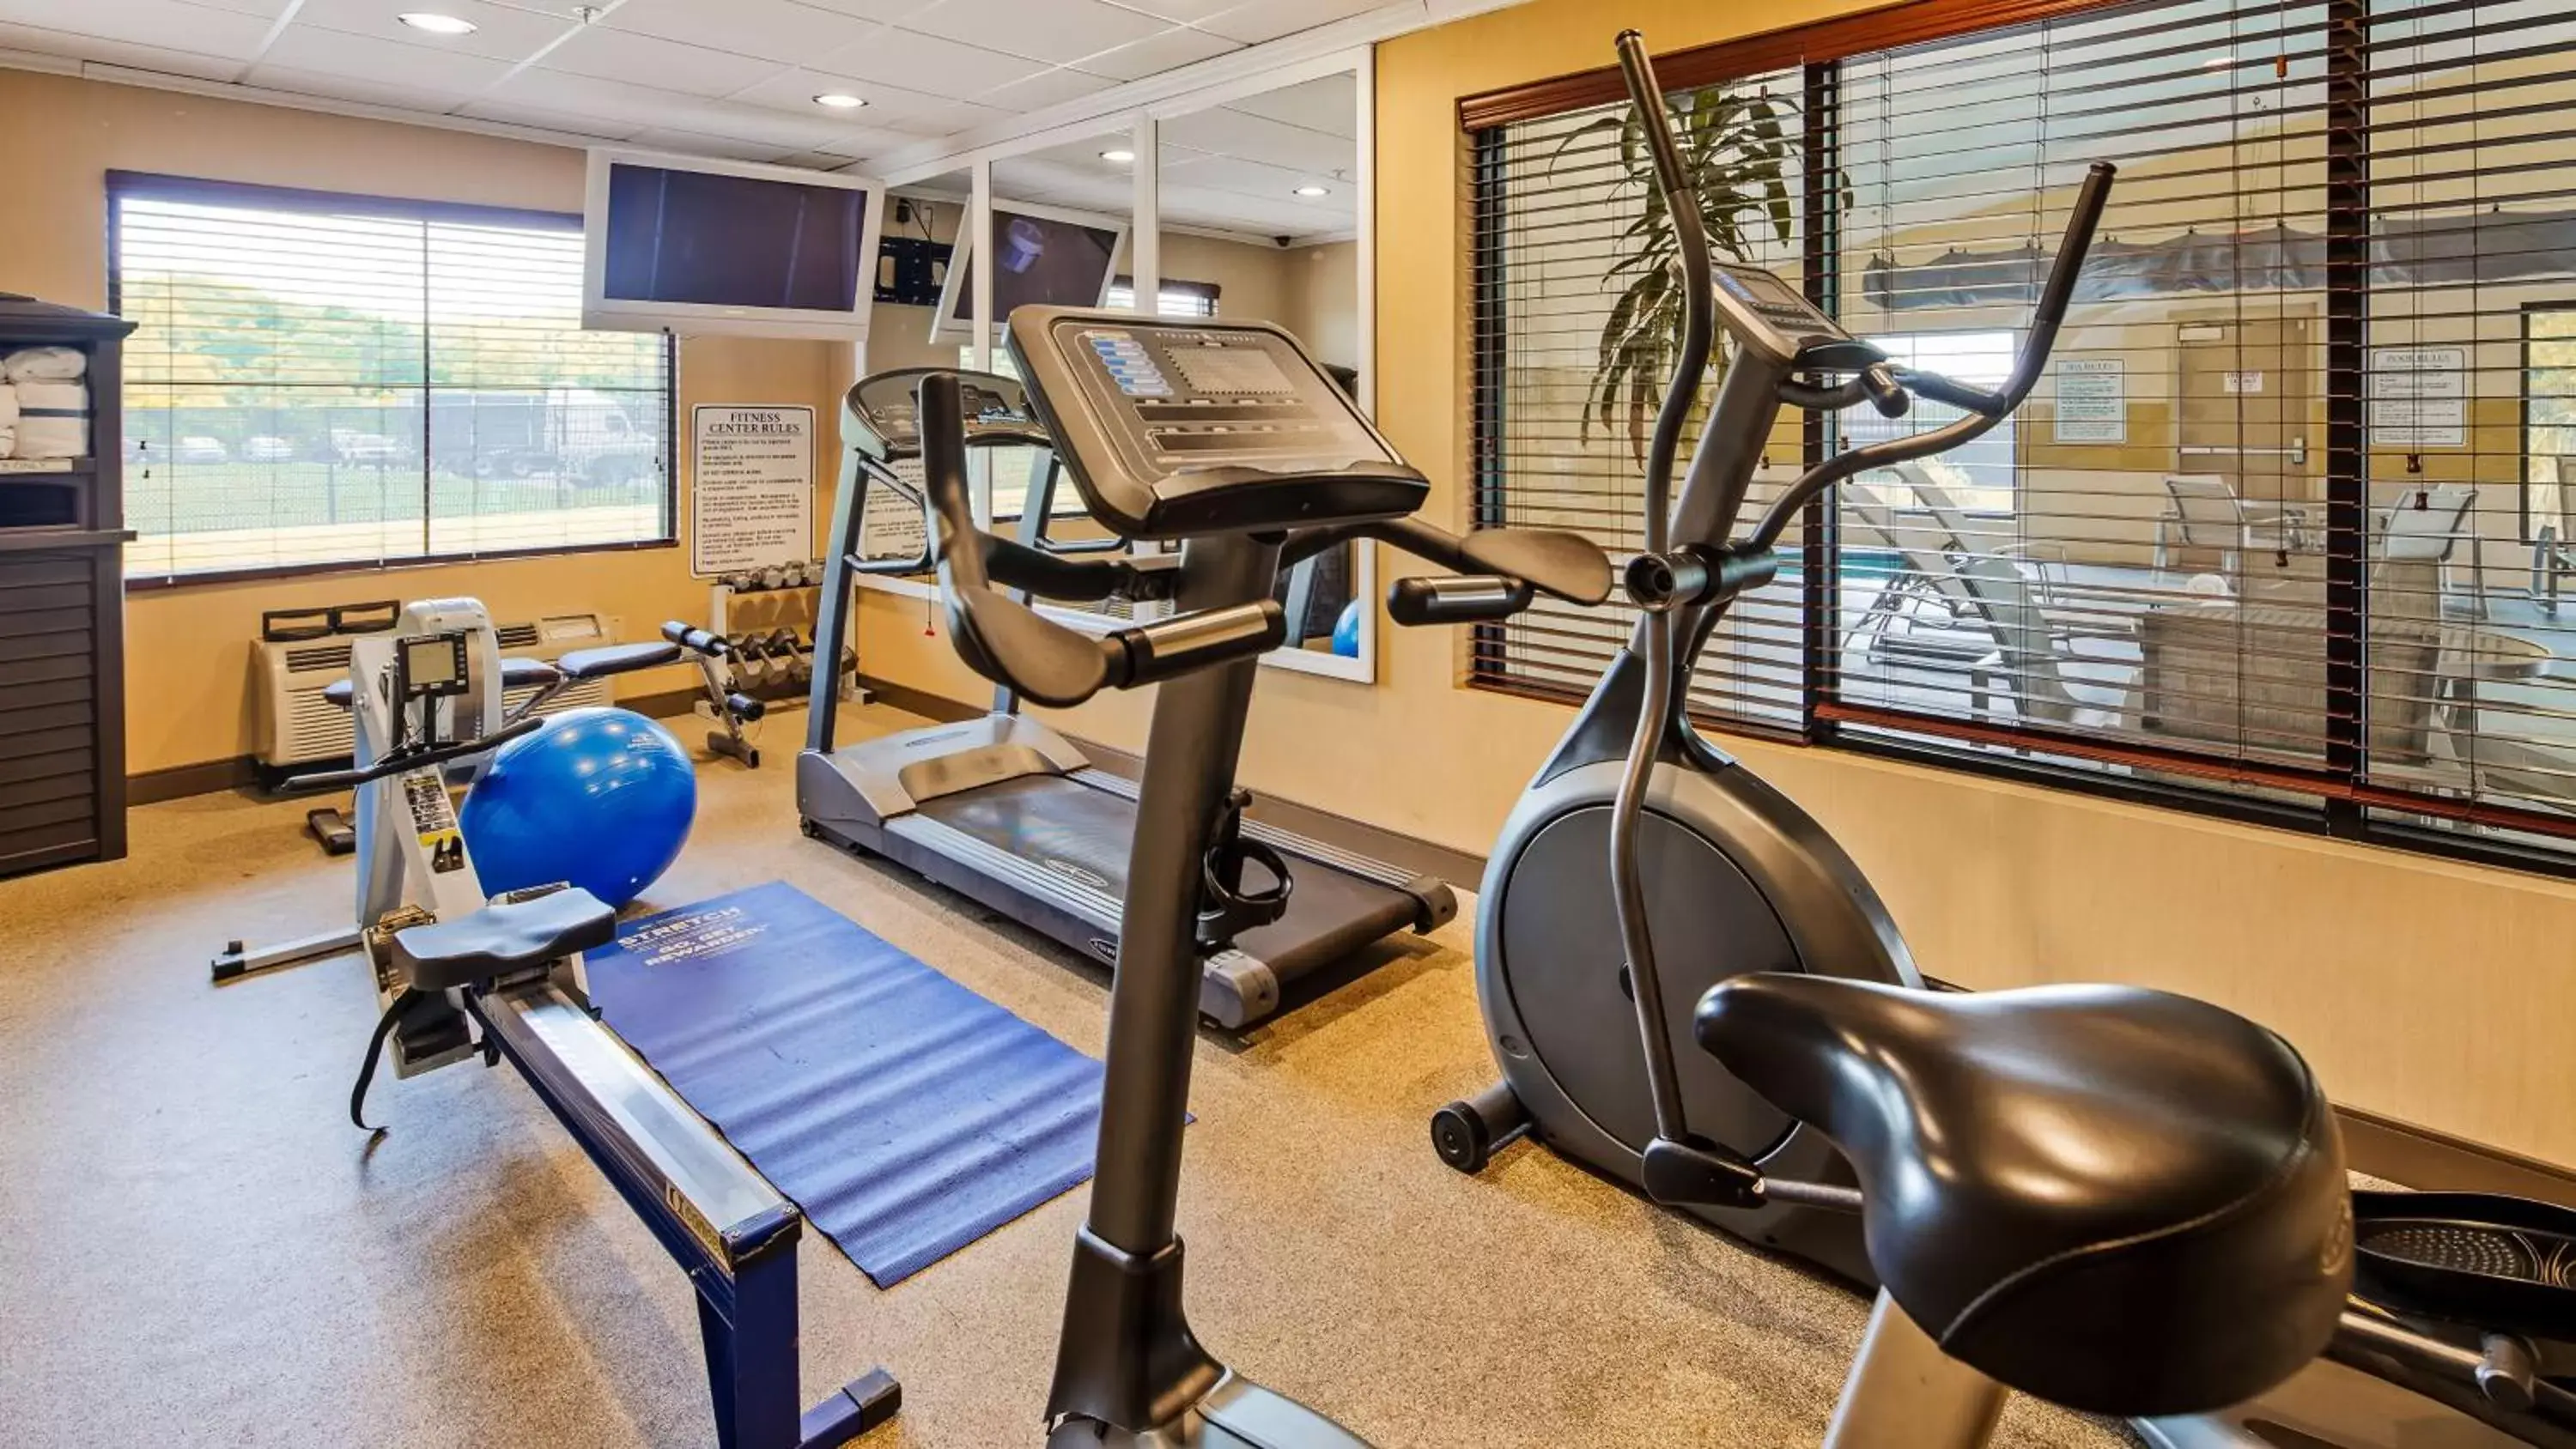 Fitness centre/facilities, Fitness Center/Facilities in Best Western Plus Strawberry Inn & Suites